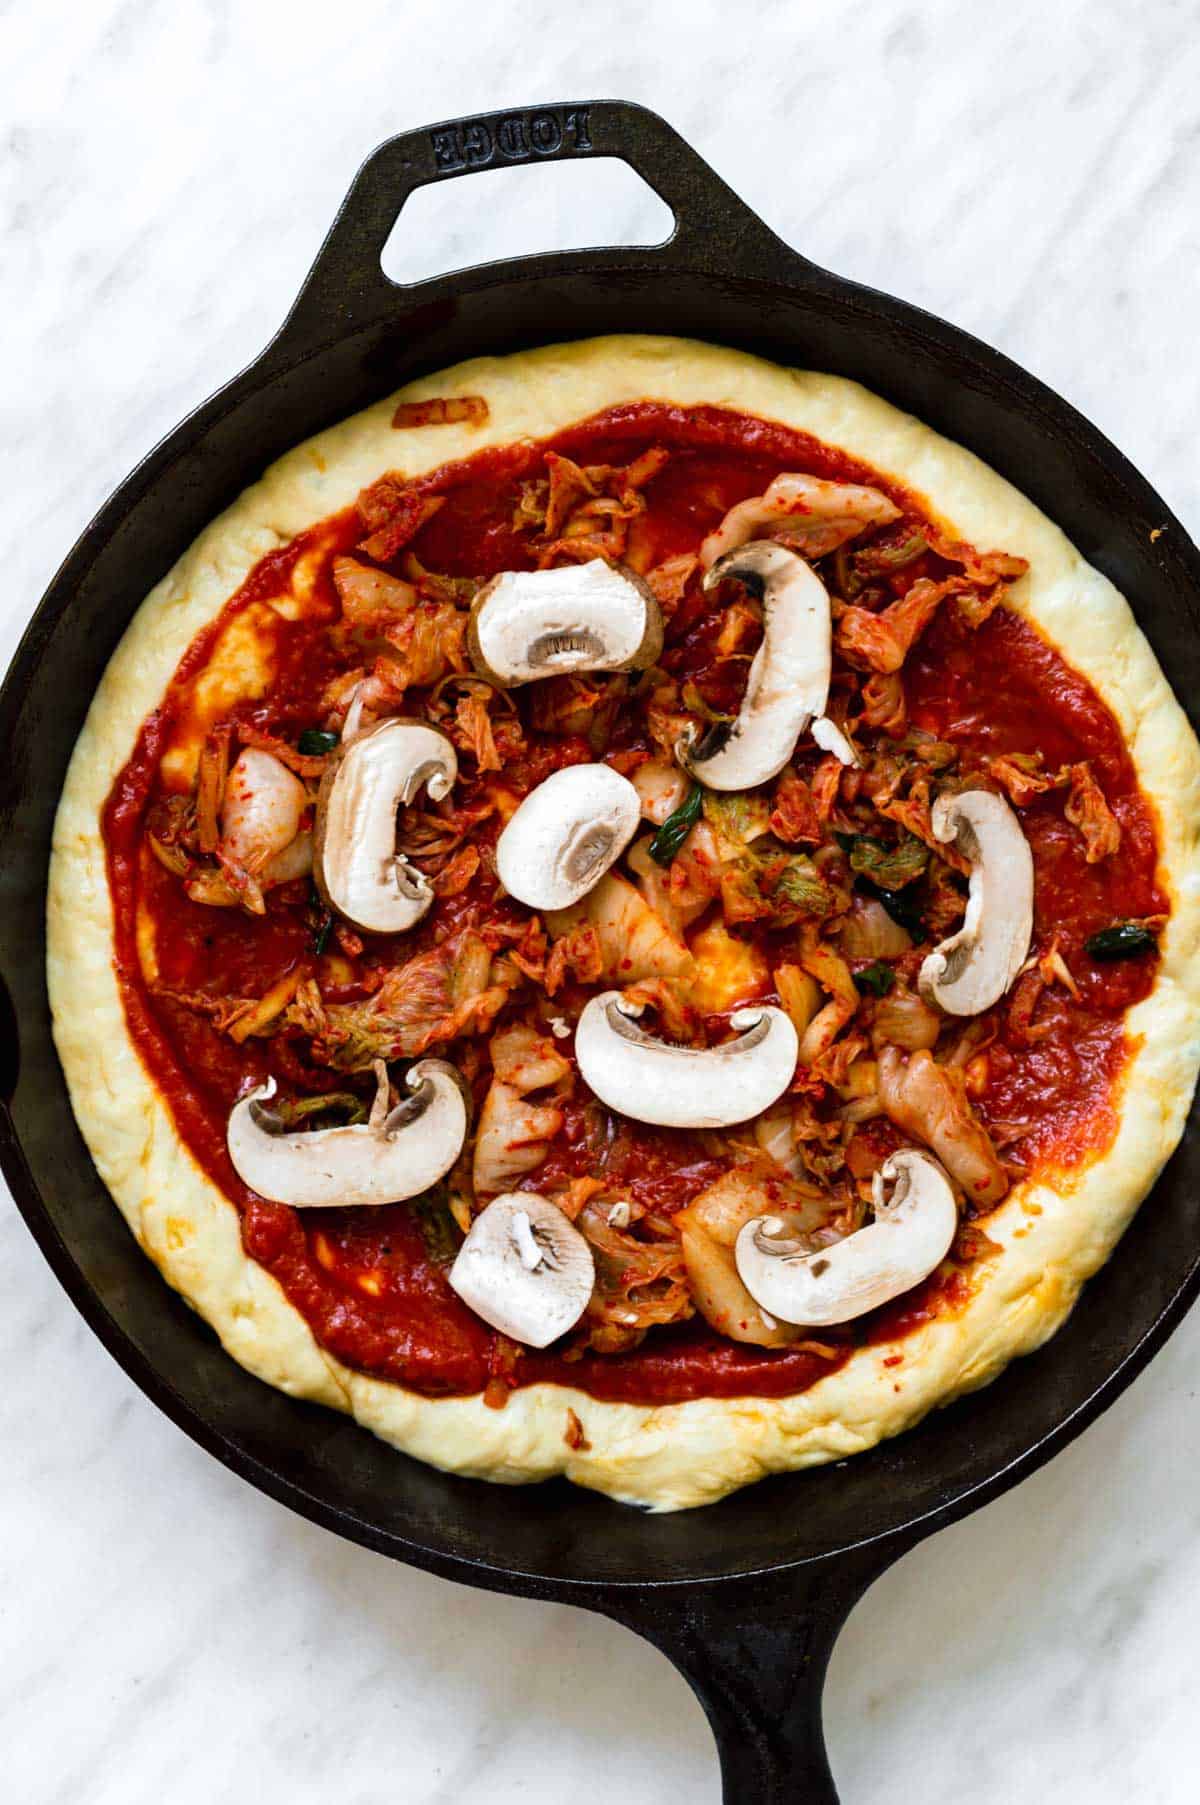 Pizza sauce with mushrooms and various toppings on Kimchi pizza dough on a cast-iron skillet.